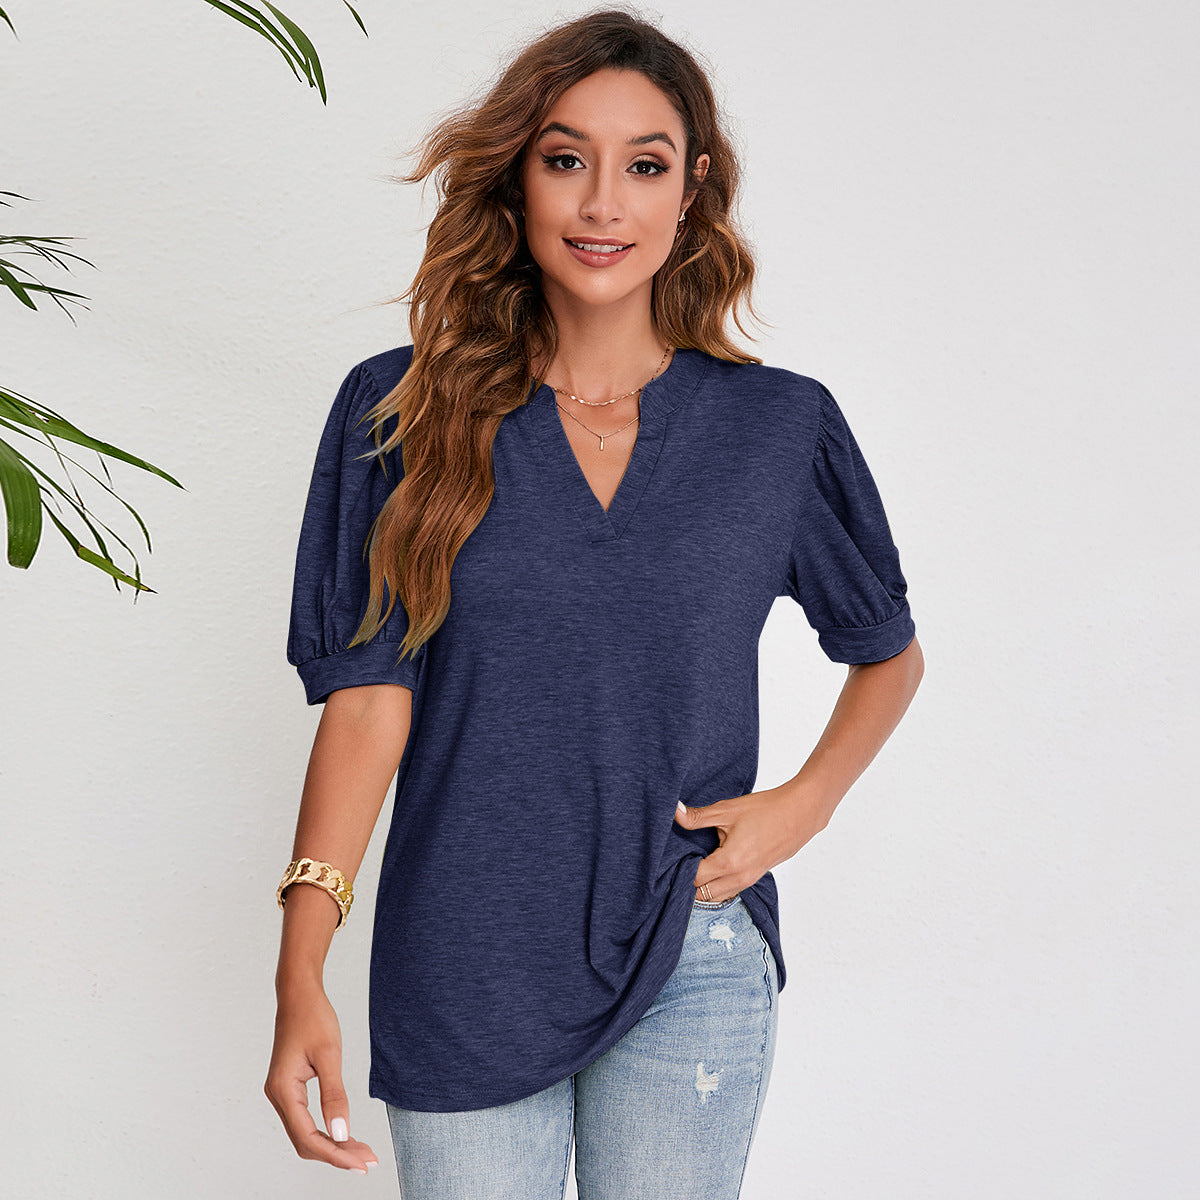 Women's Summer Casual V-neck Solid Color Puff Sleeve Loose Tops